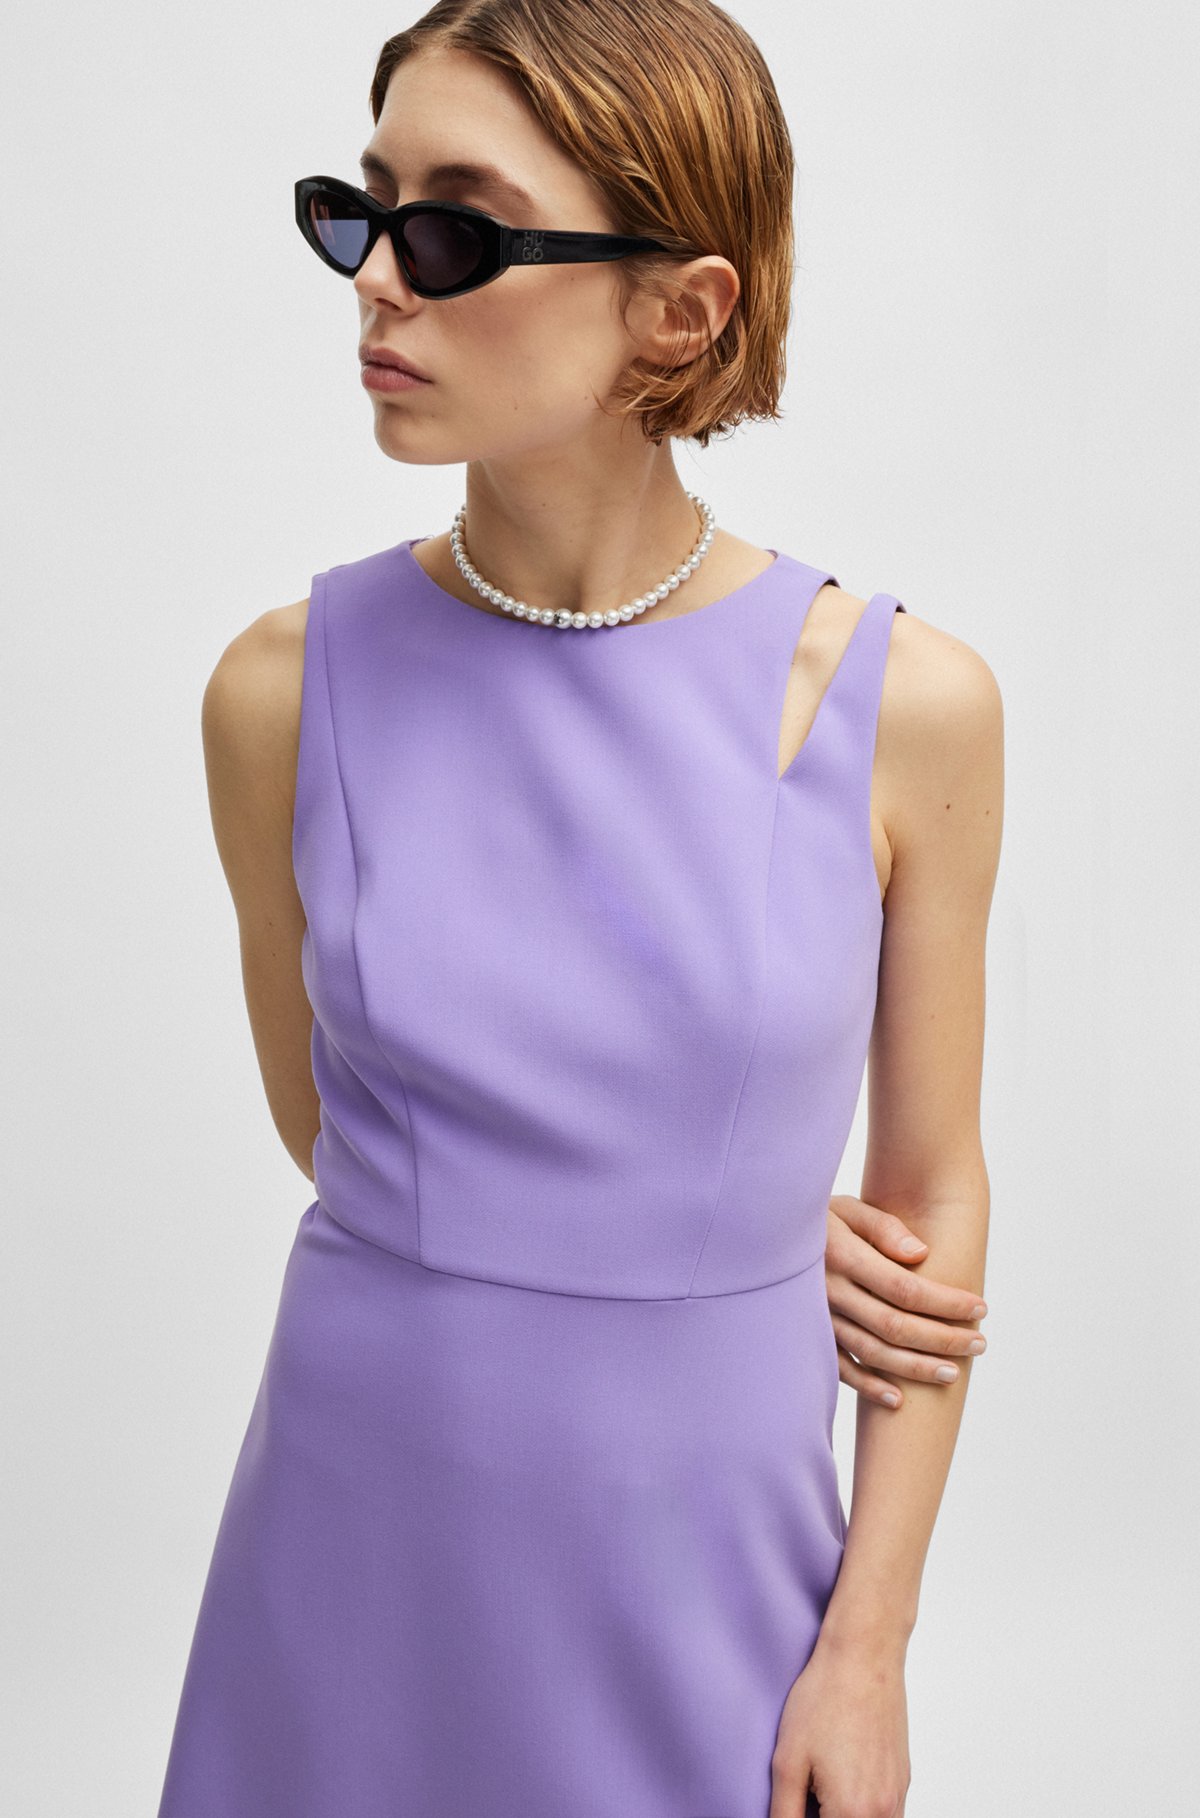 HUGO - Sleeveless mini dress with cut-out shoulder detail